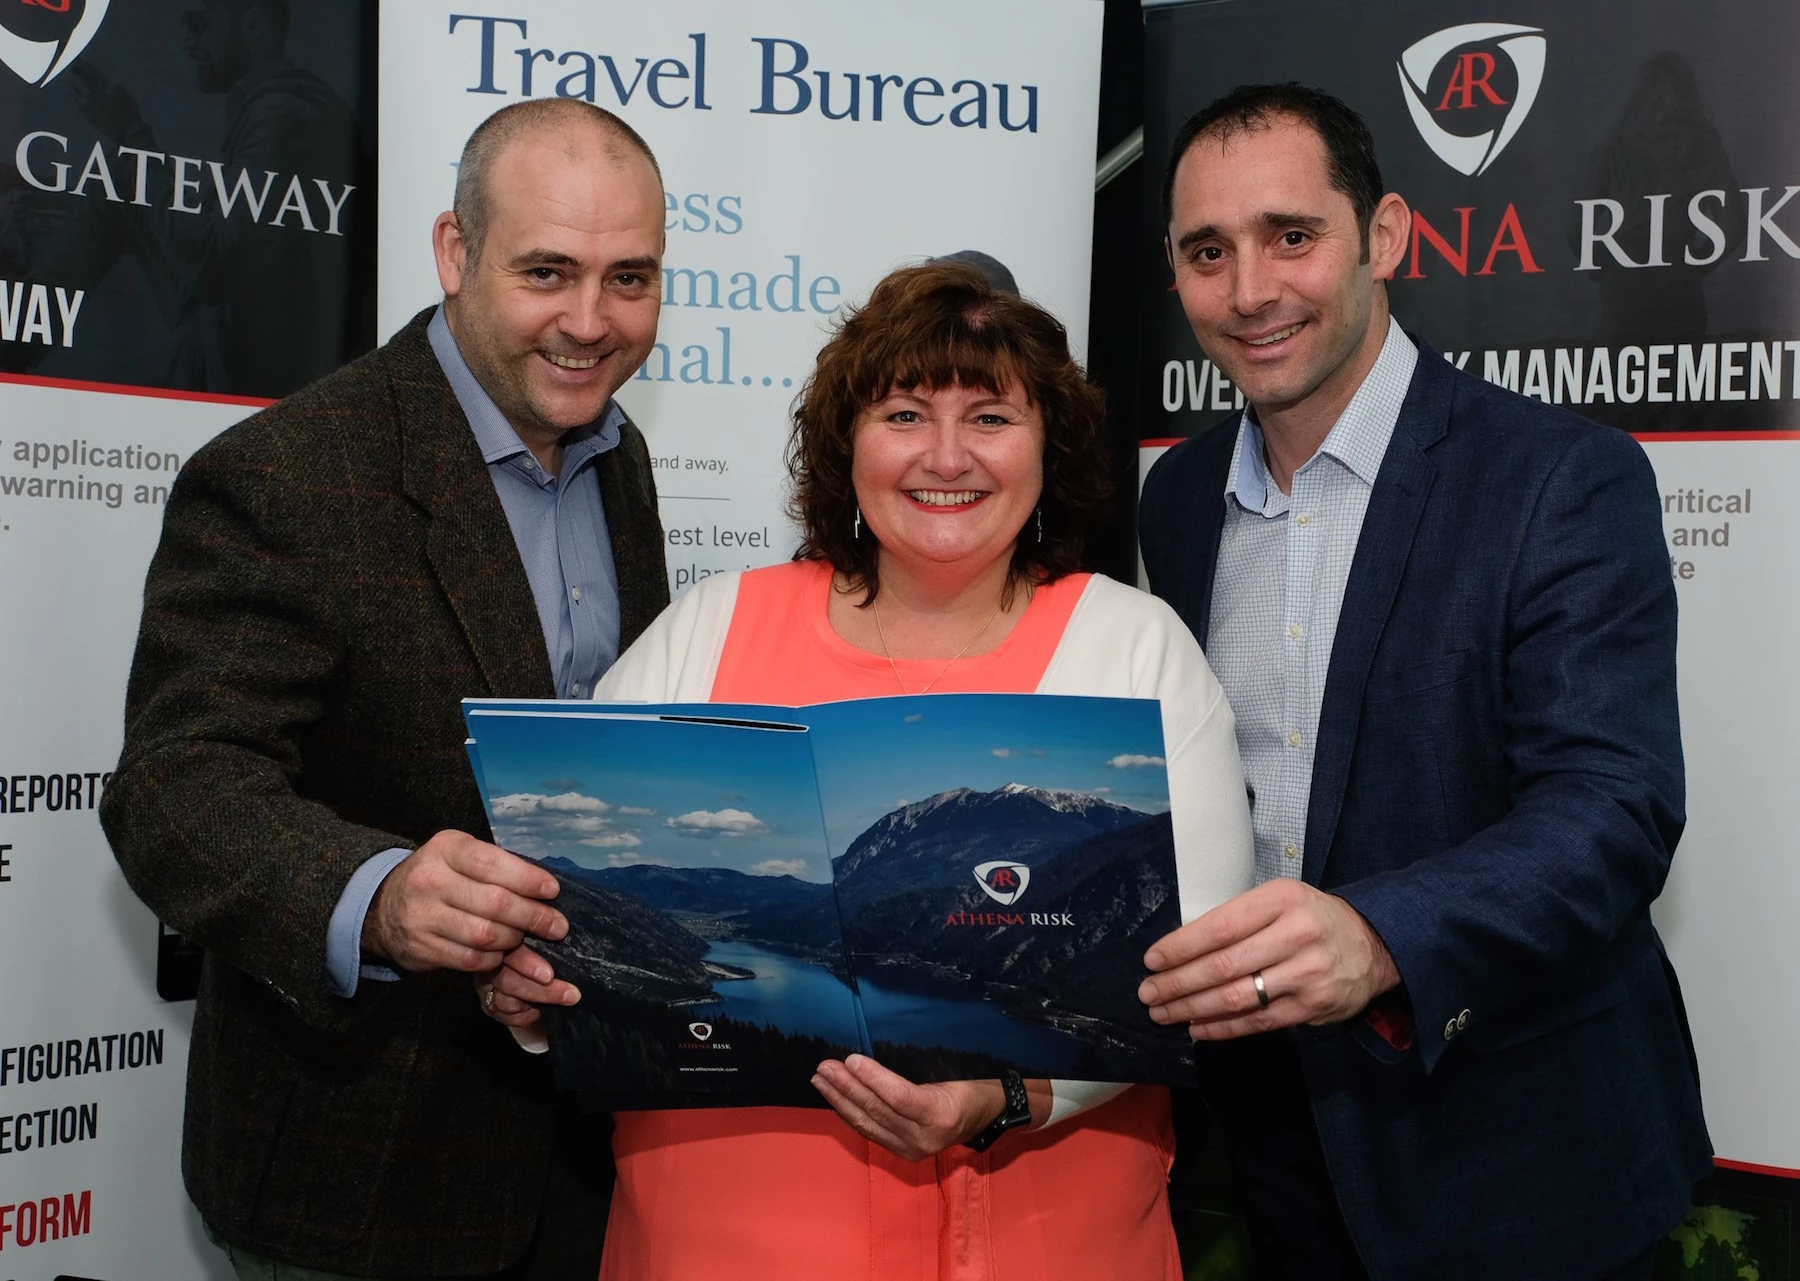 Travel Bureau's Anne Bromley with David Tait and Jason Hicks from Athena Risk